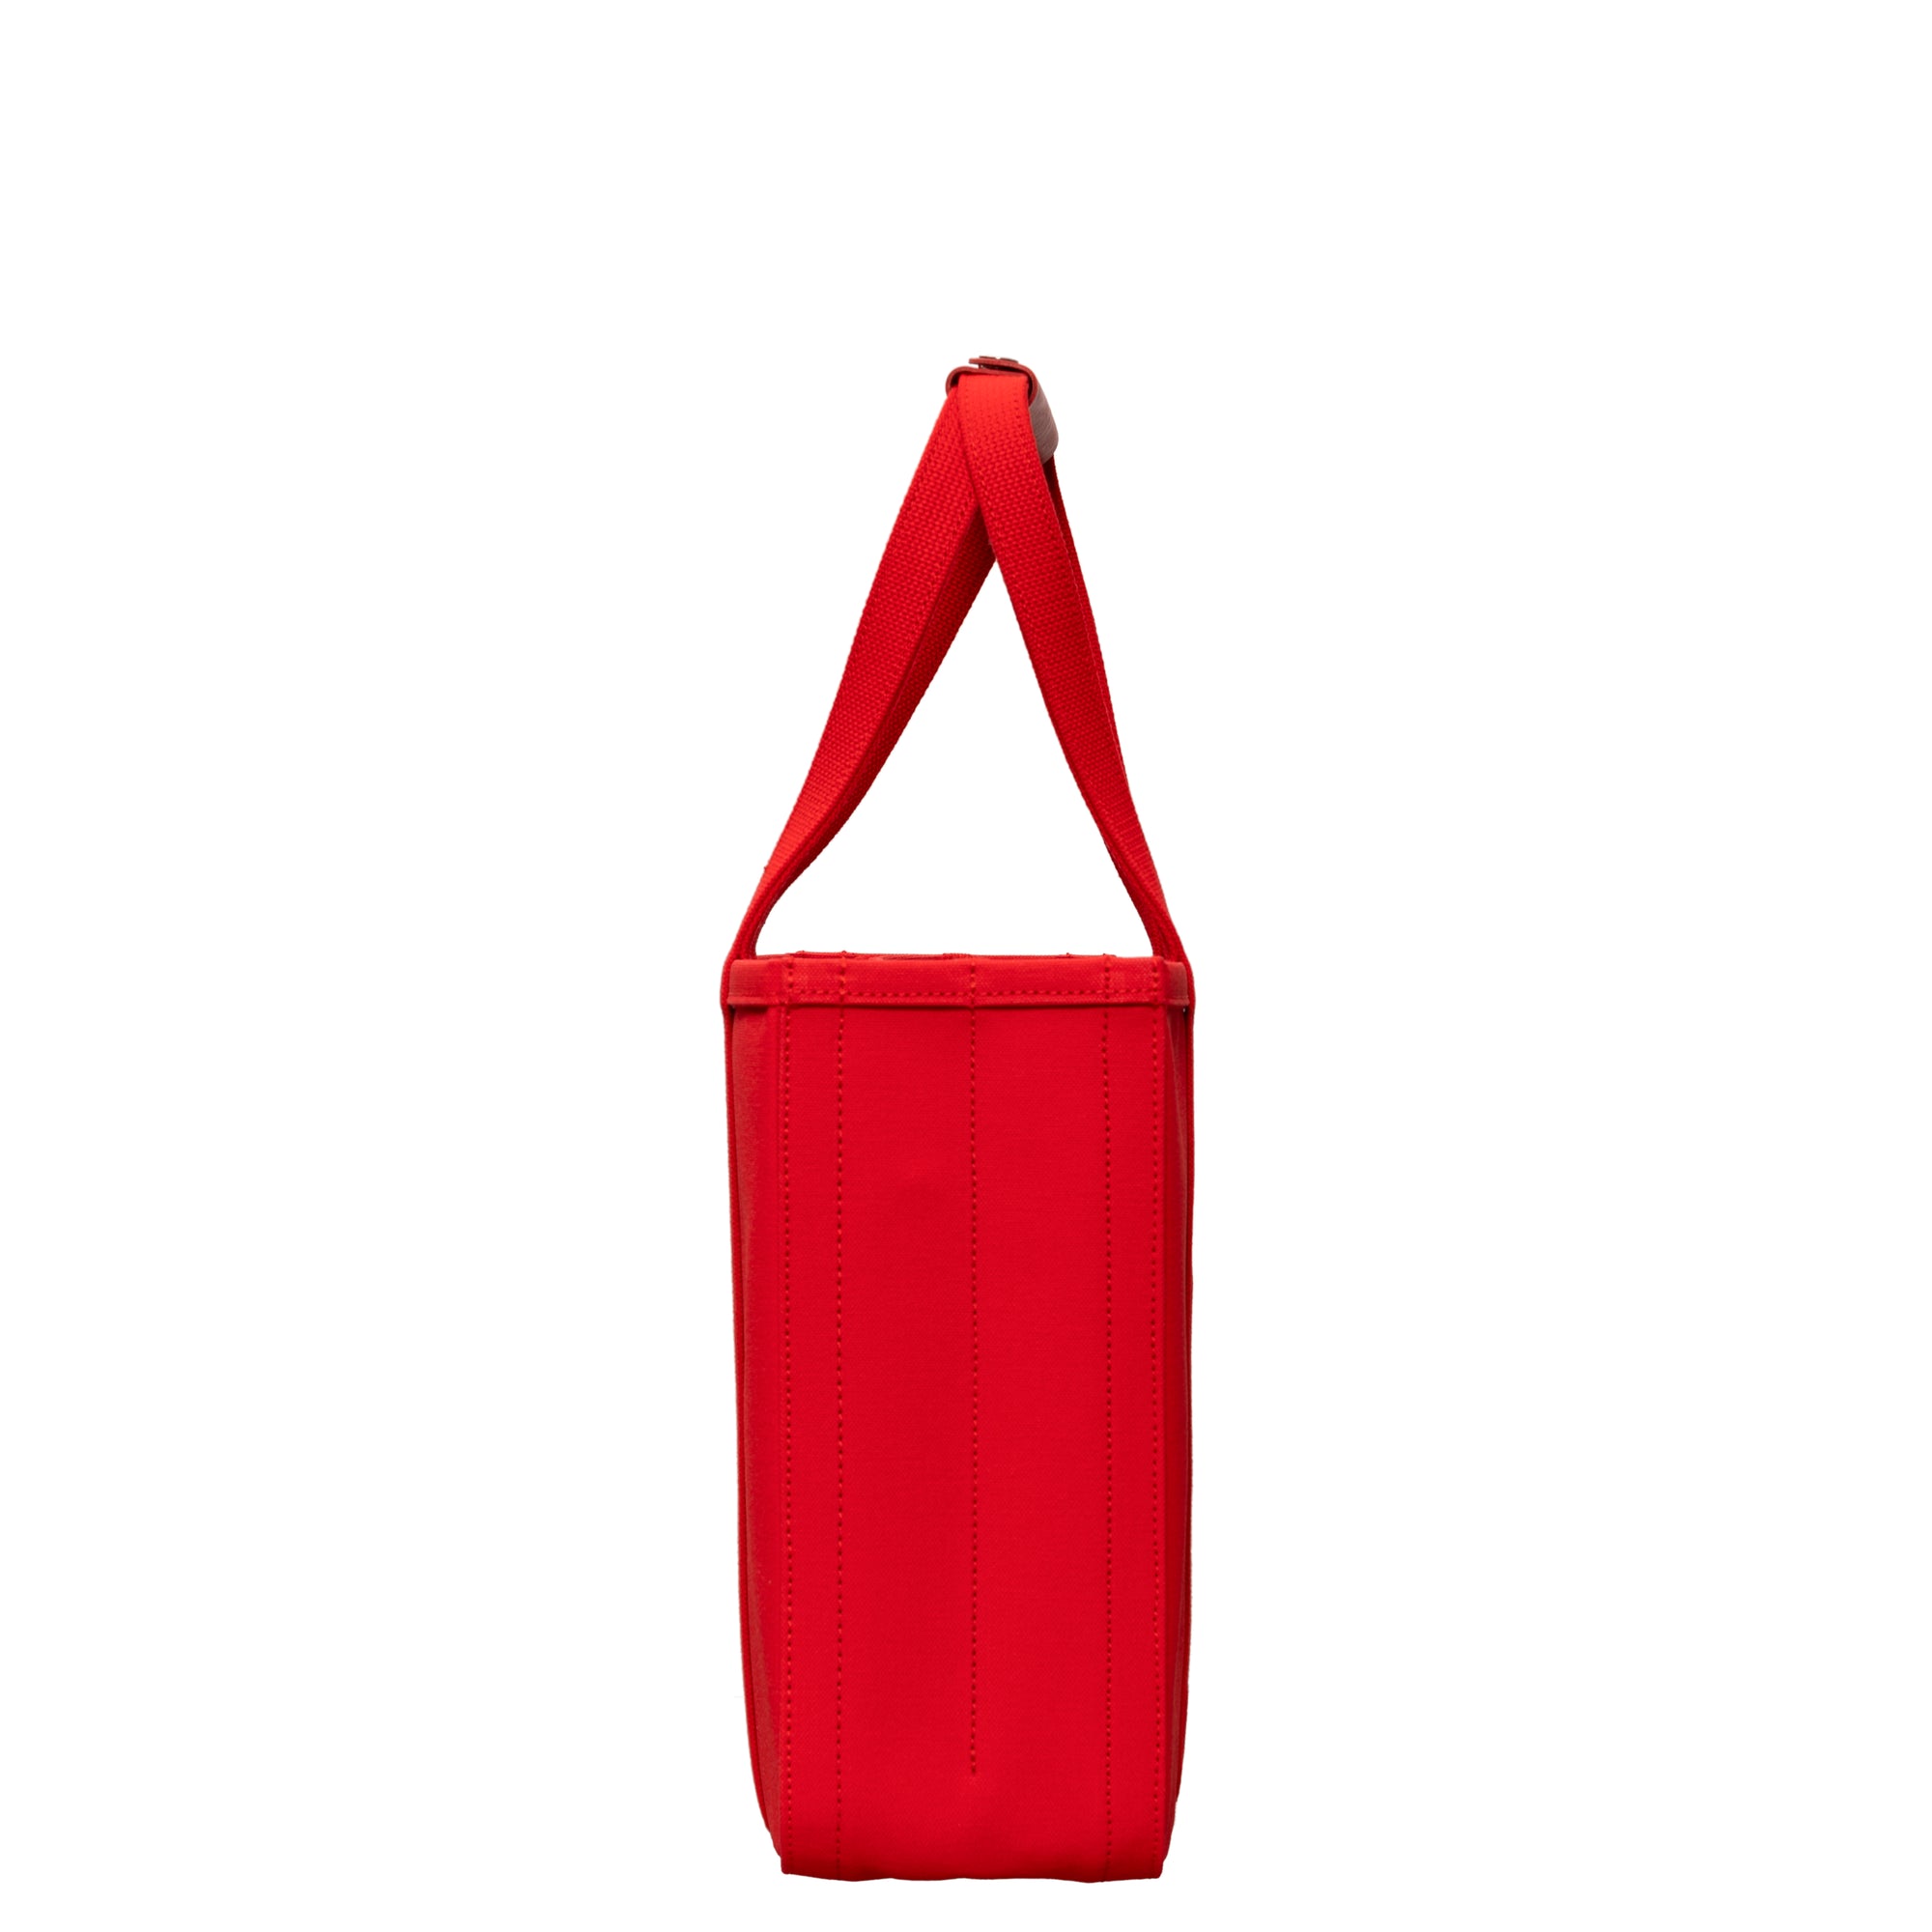 CHACOLI - 03 TOTE W400 X H330 X D140 - (RED) view 2